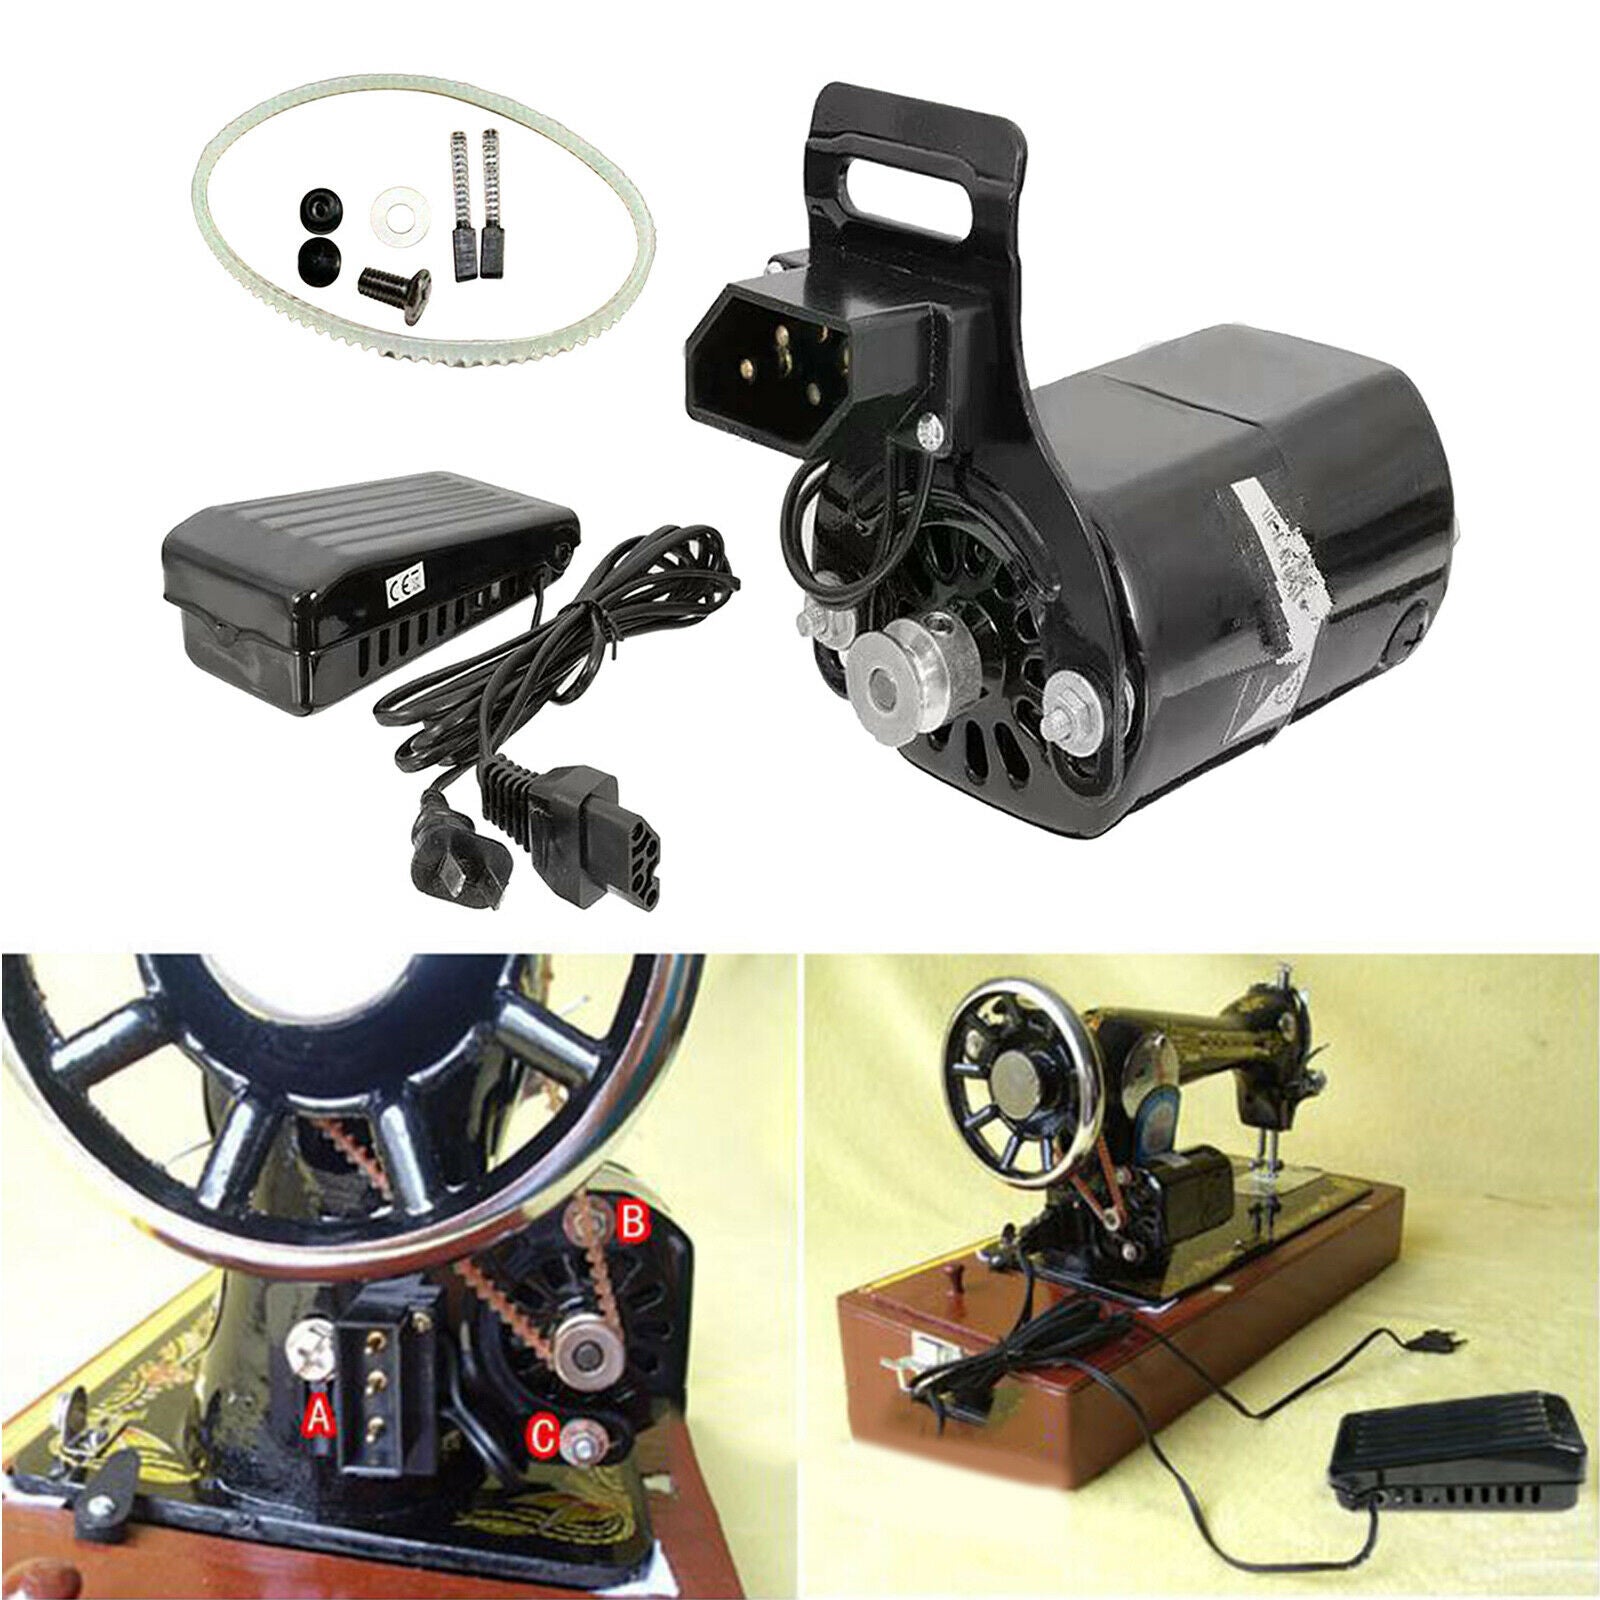 180W Domestic Sewing Machine Motor with Belt Foot Control Pedal Equipment